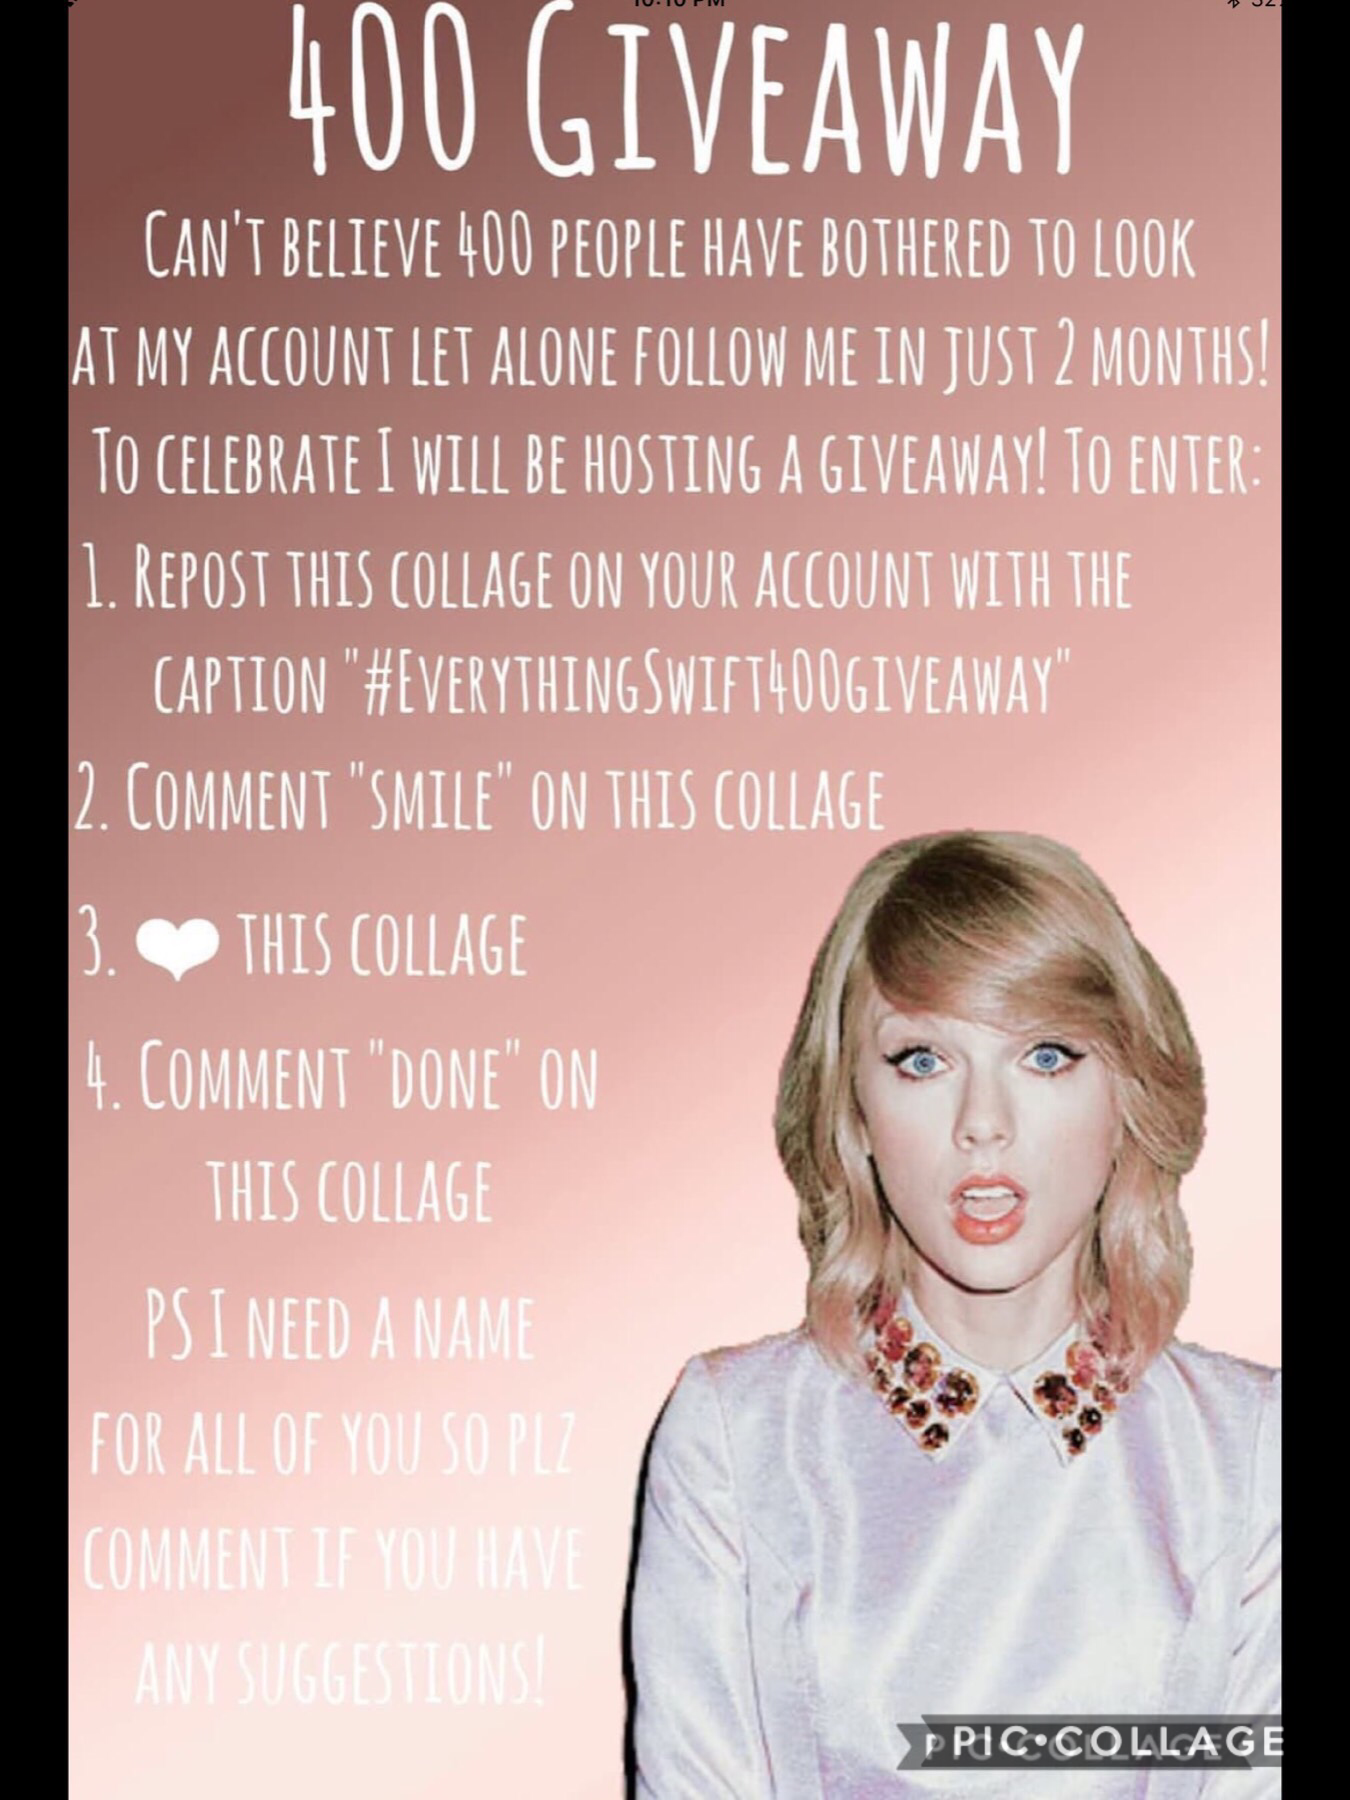 #EverythingSwift400giveaway